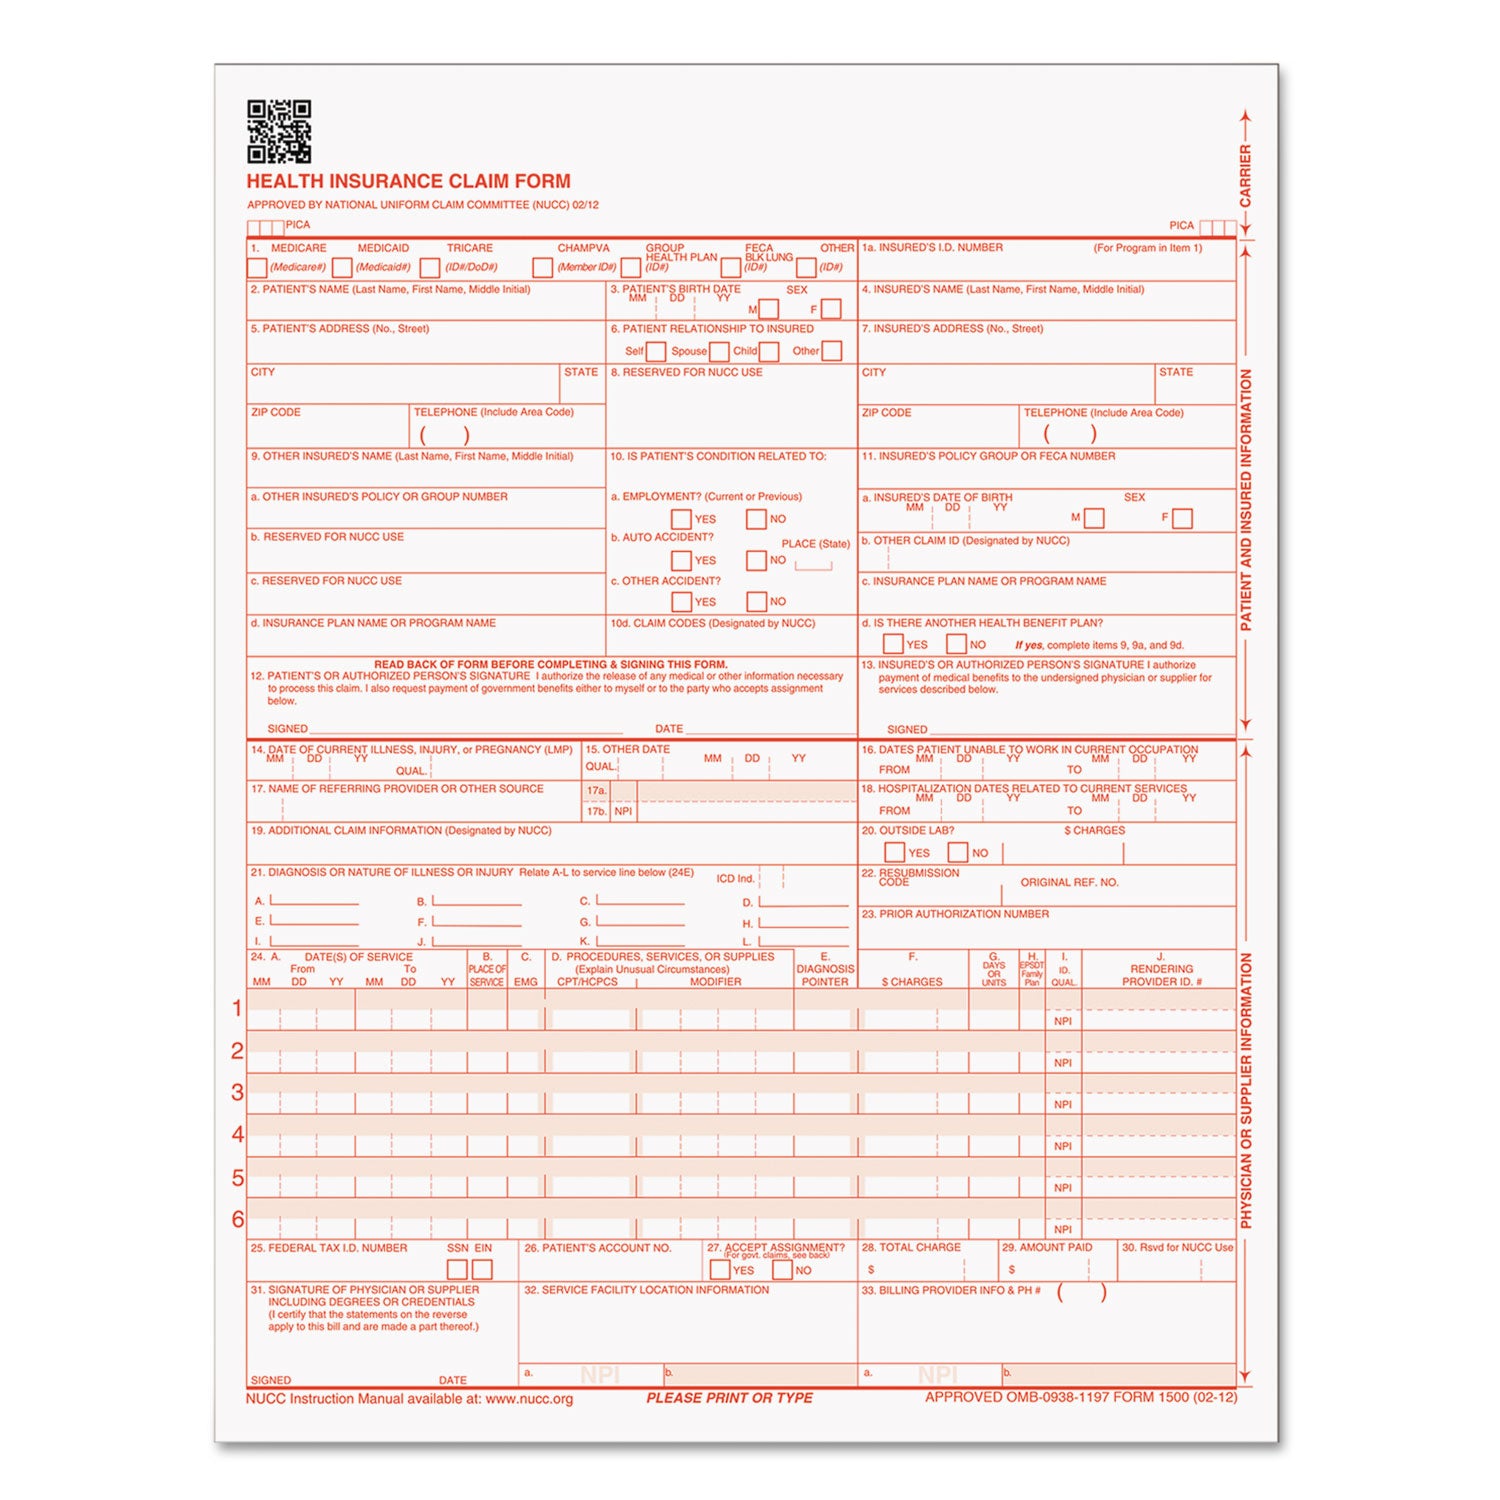 CMS-1500 Medicare/Medicaid Forms for Laser Printers, One-Part (No Copies), 8.5 x 11, 250 Forms Total - 